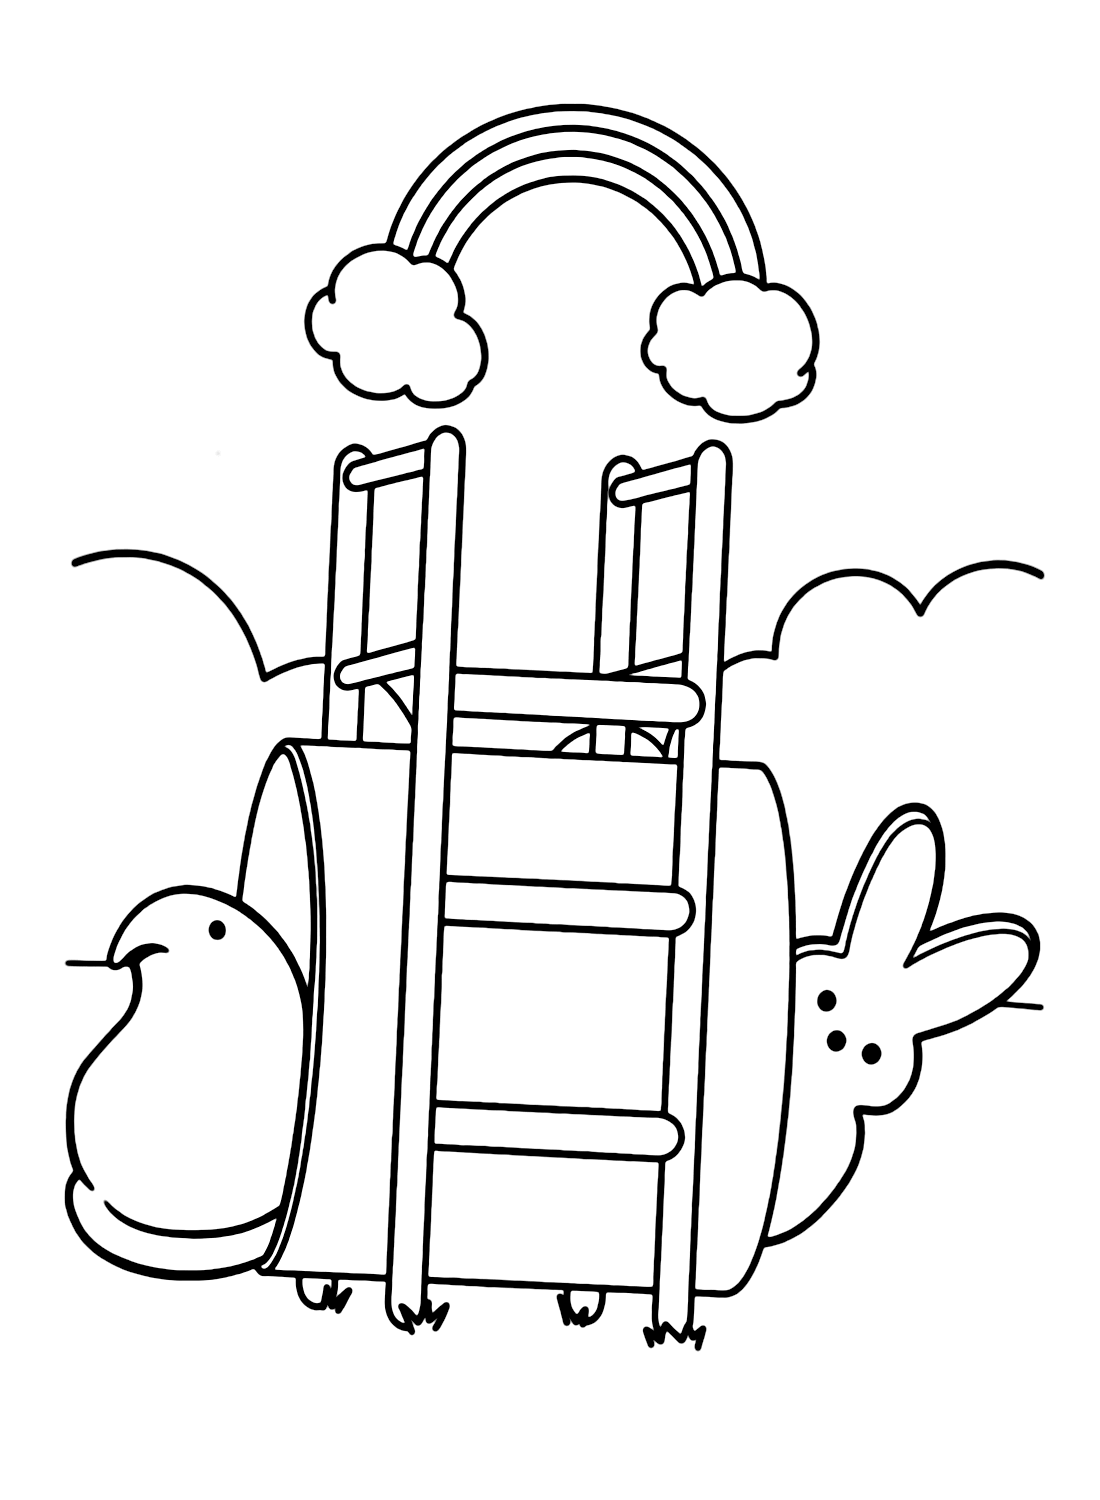 Fun Bunny and Chick Peeps Coloring Page